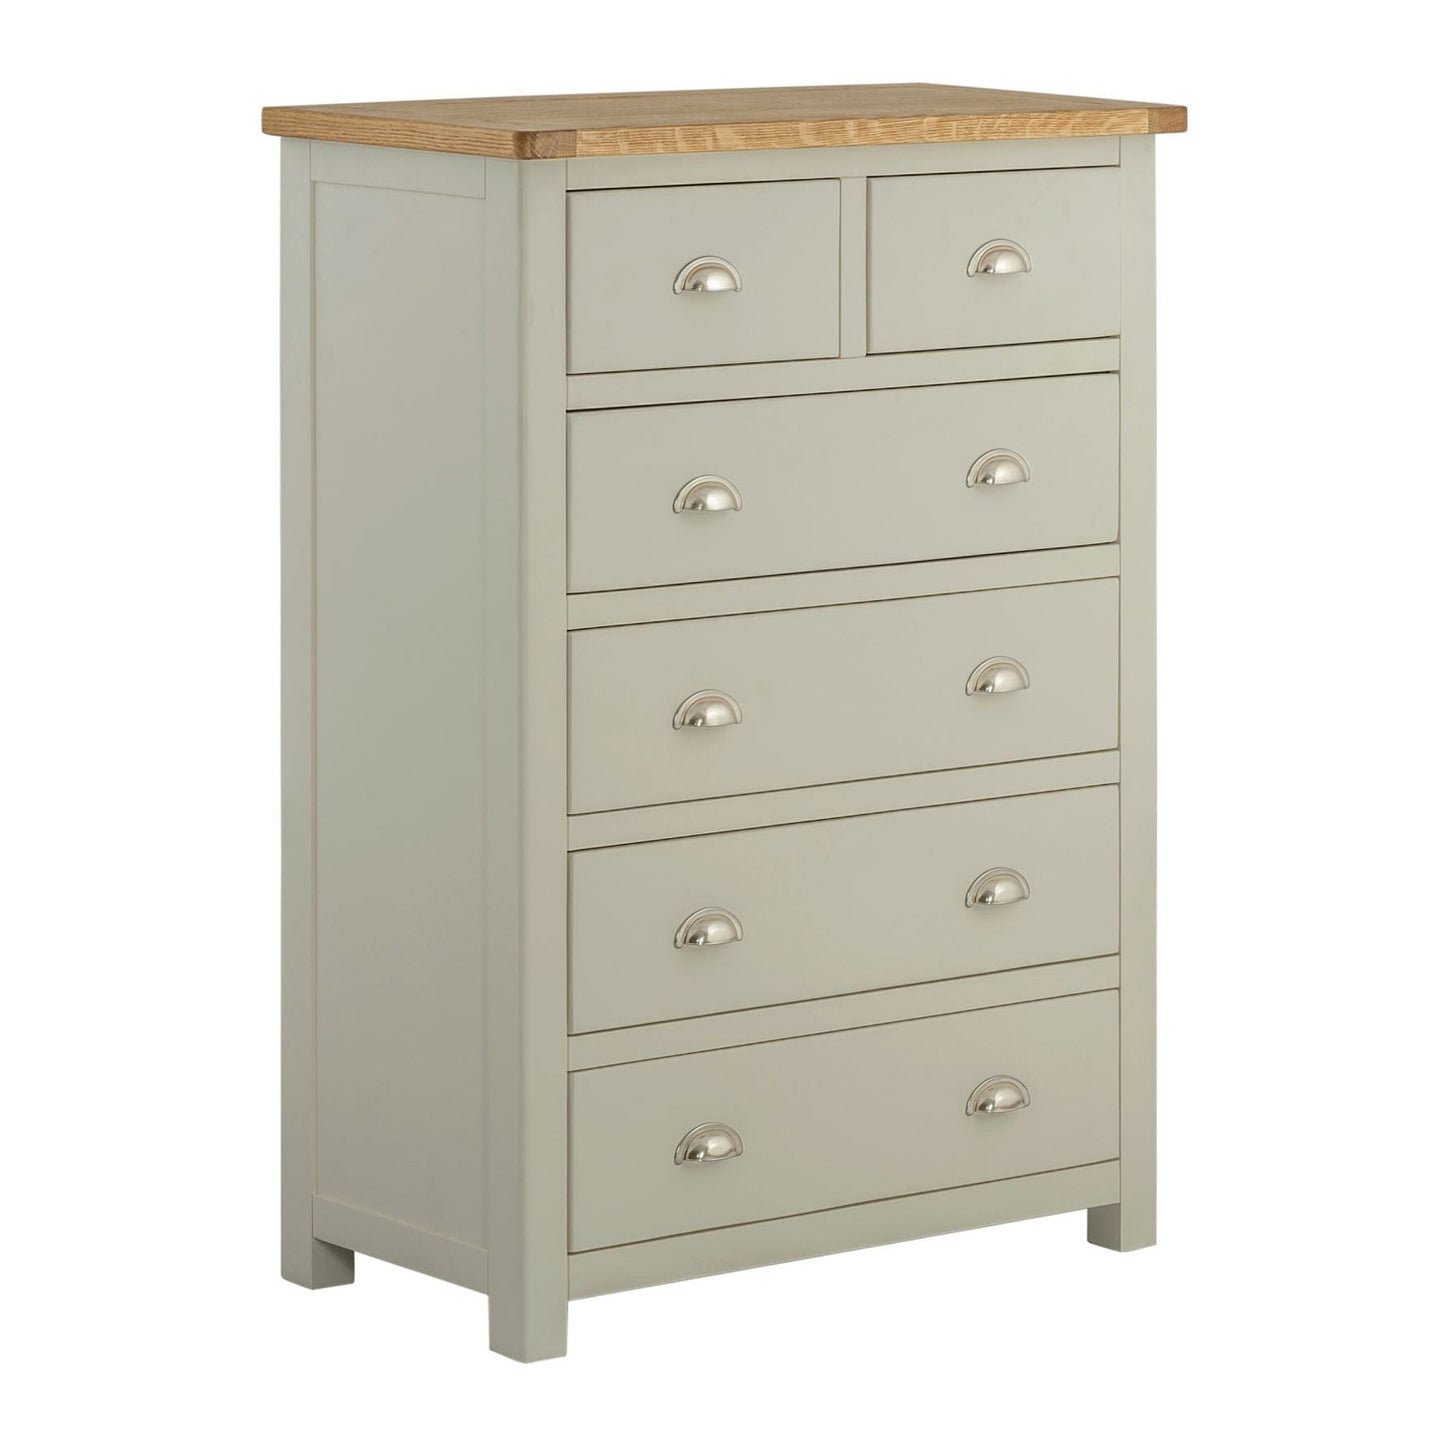 Todenham Oak & Painted Chest of Drawers - 2 + 4 Drawer Chest - Better Furniture Norwich & Great Yarmouth